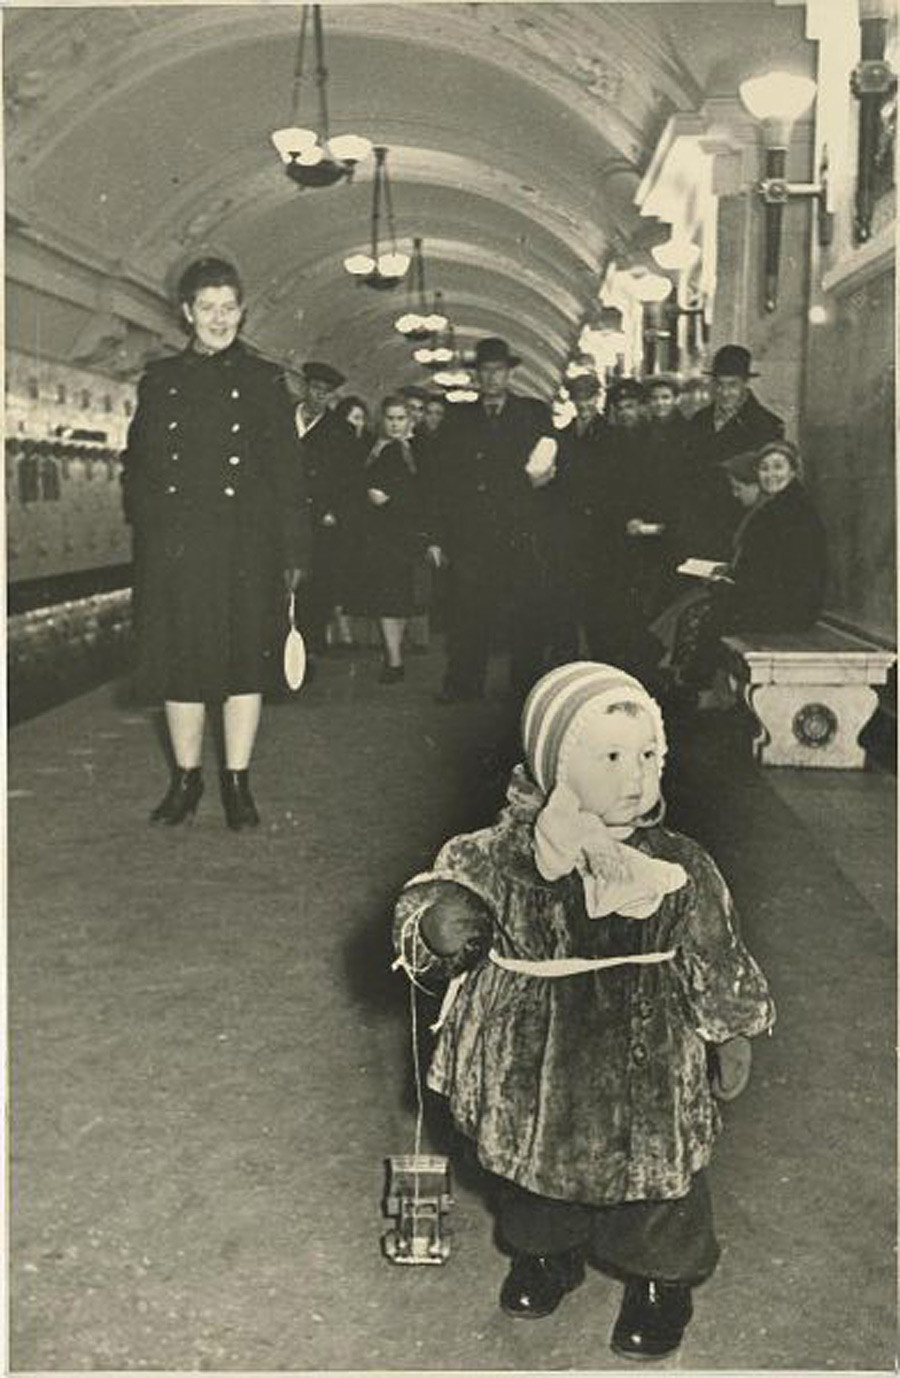 In the subway, 1950s